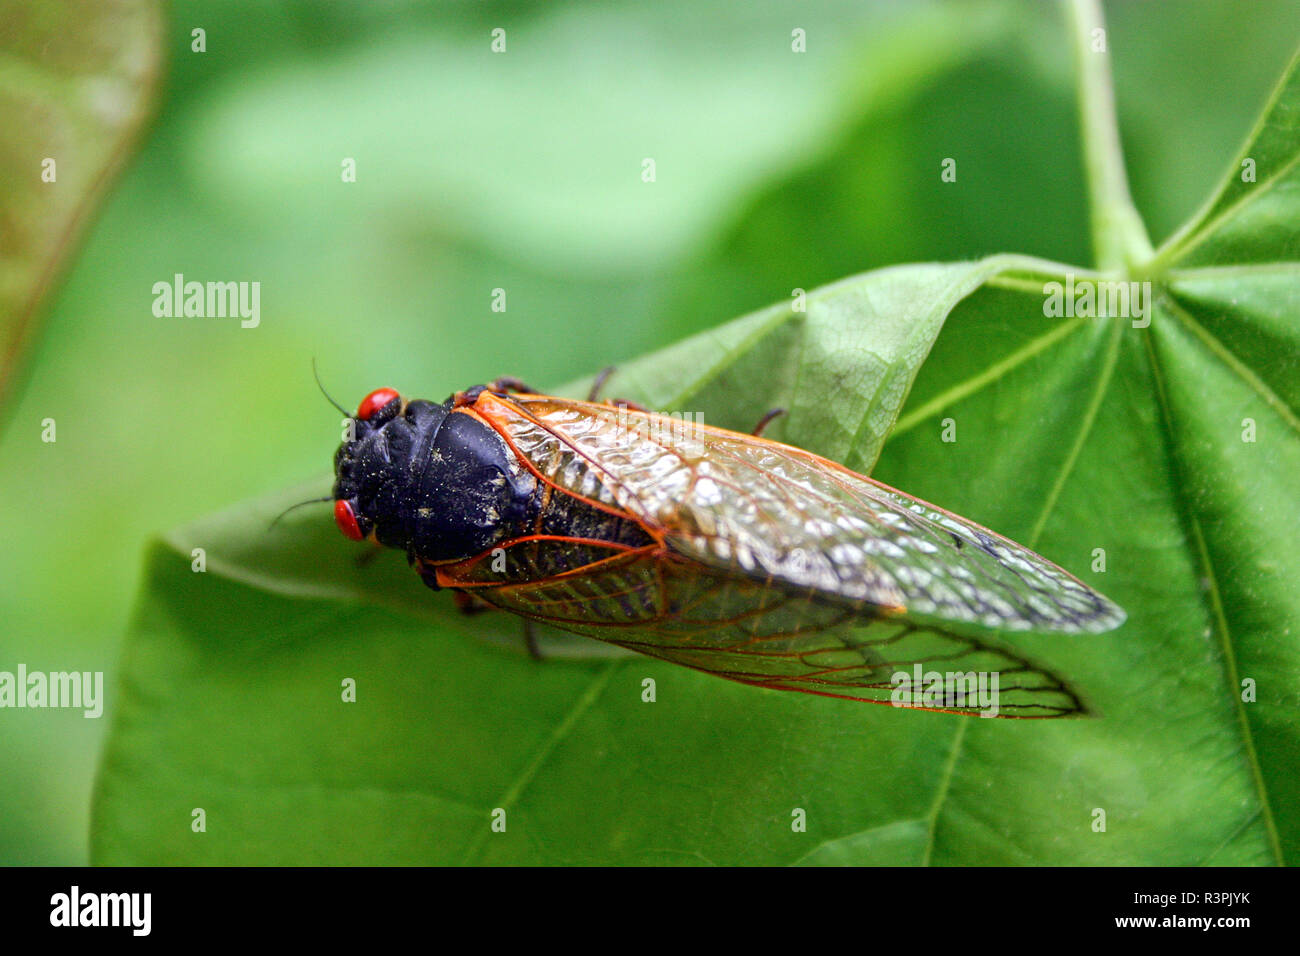 Close up of a colorful adult cicada with a 17 year life cycle resting on a large green leaf Stock Photo